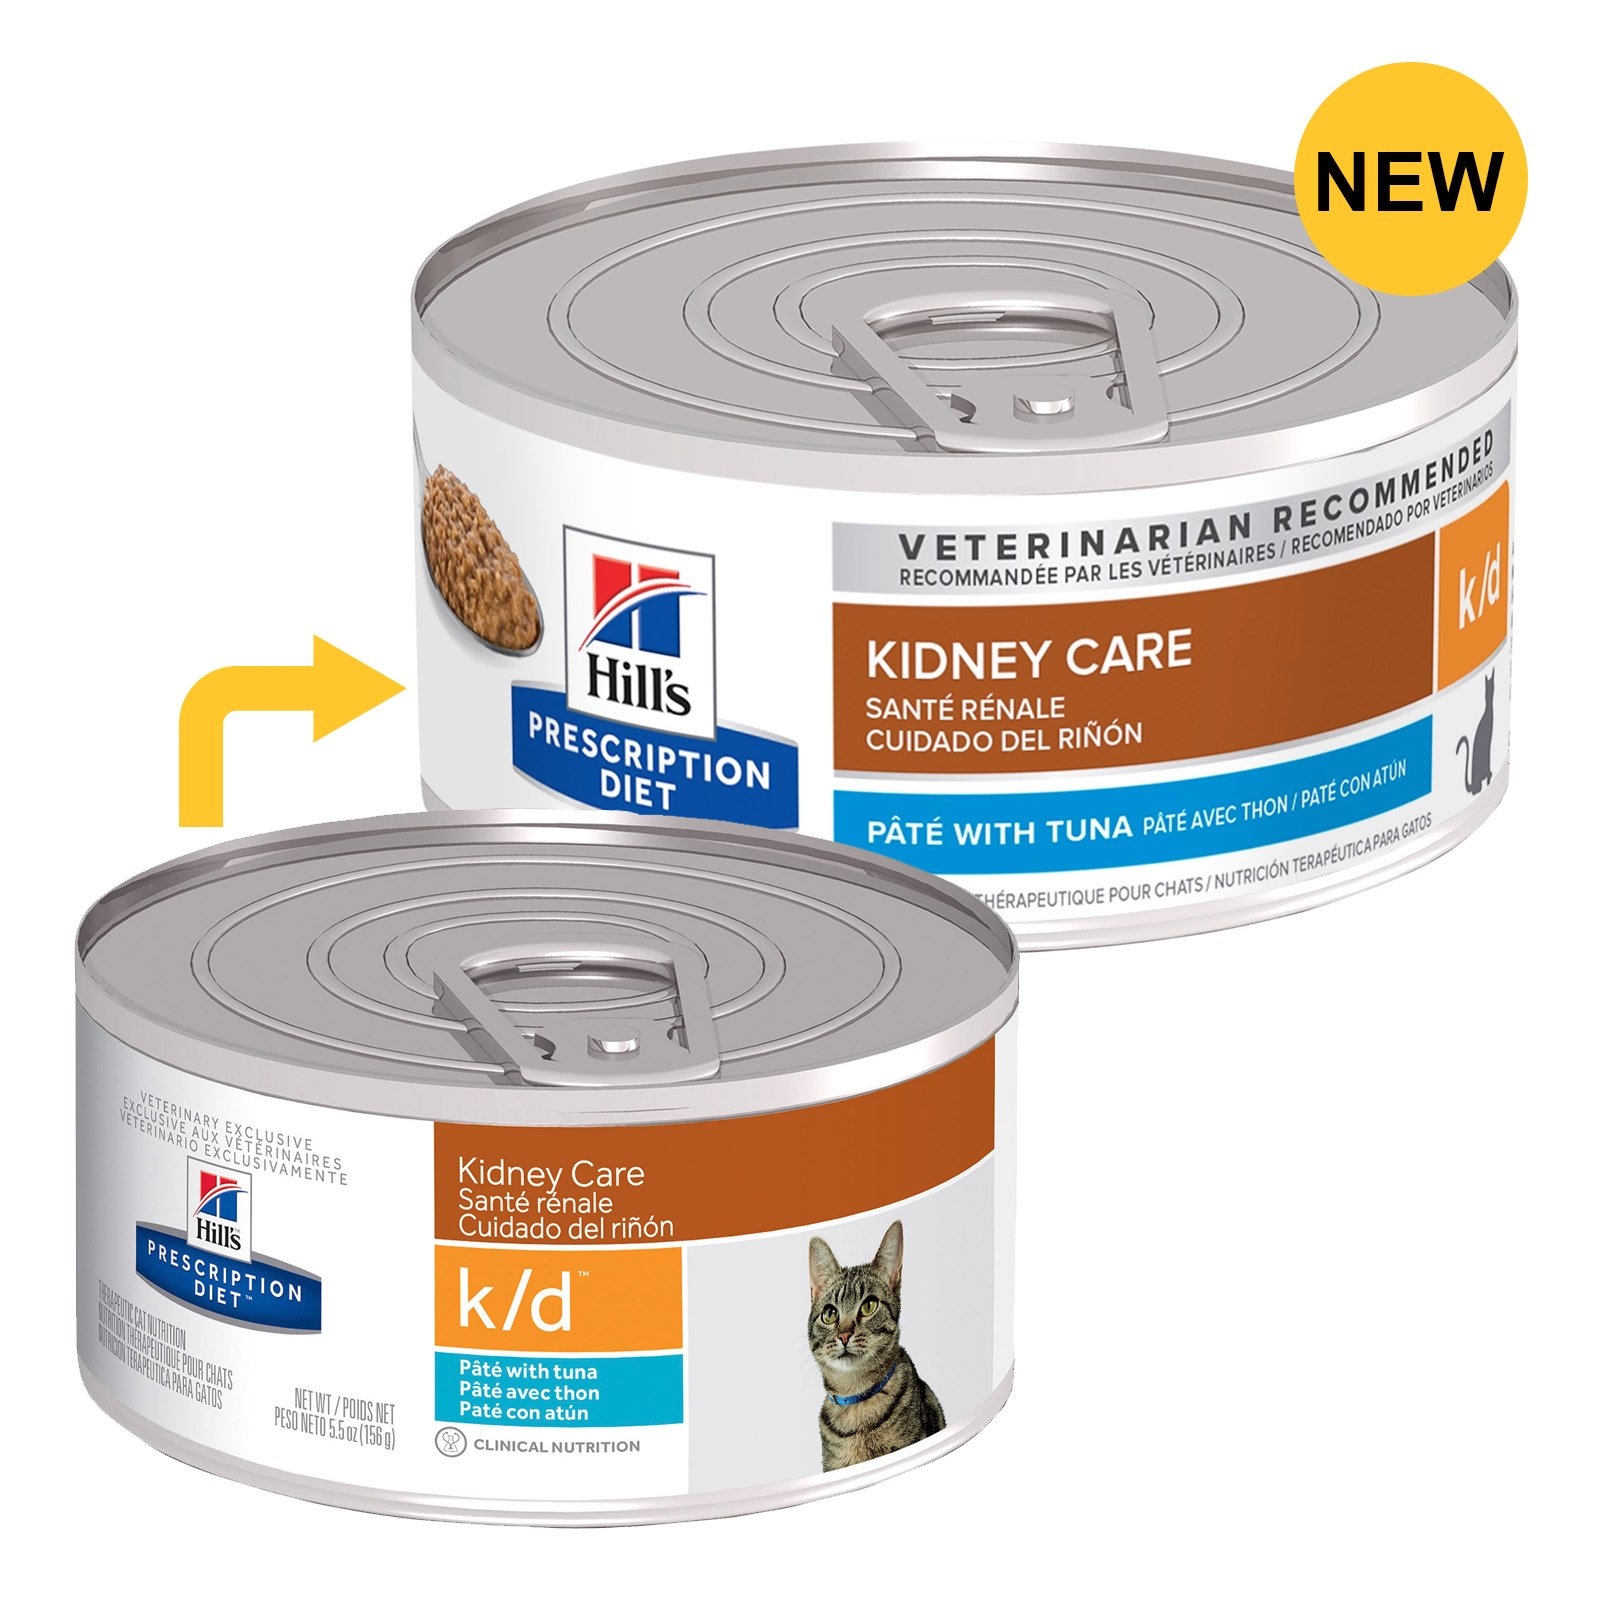 Hill's Prescription Diet k/d Kidney Care with Tuna Canned Cat Food